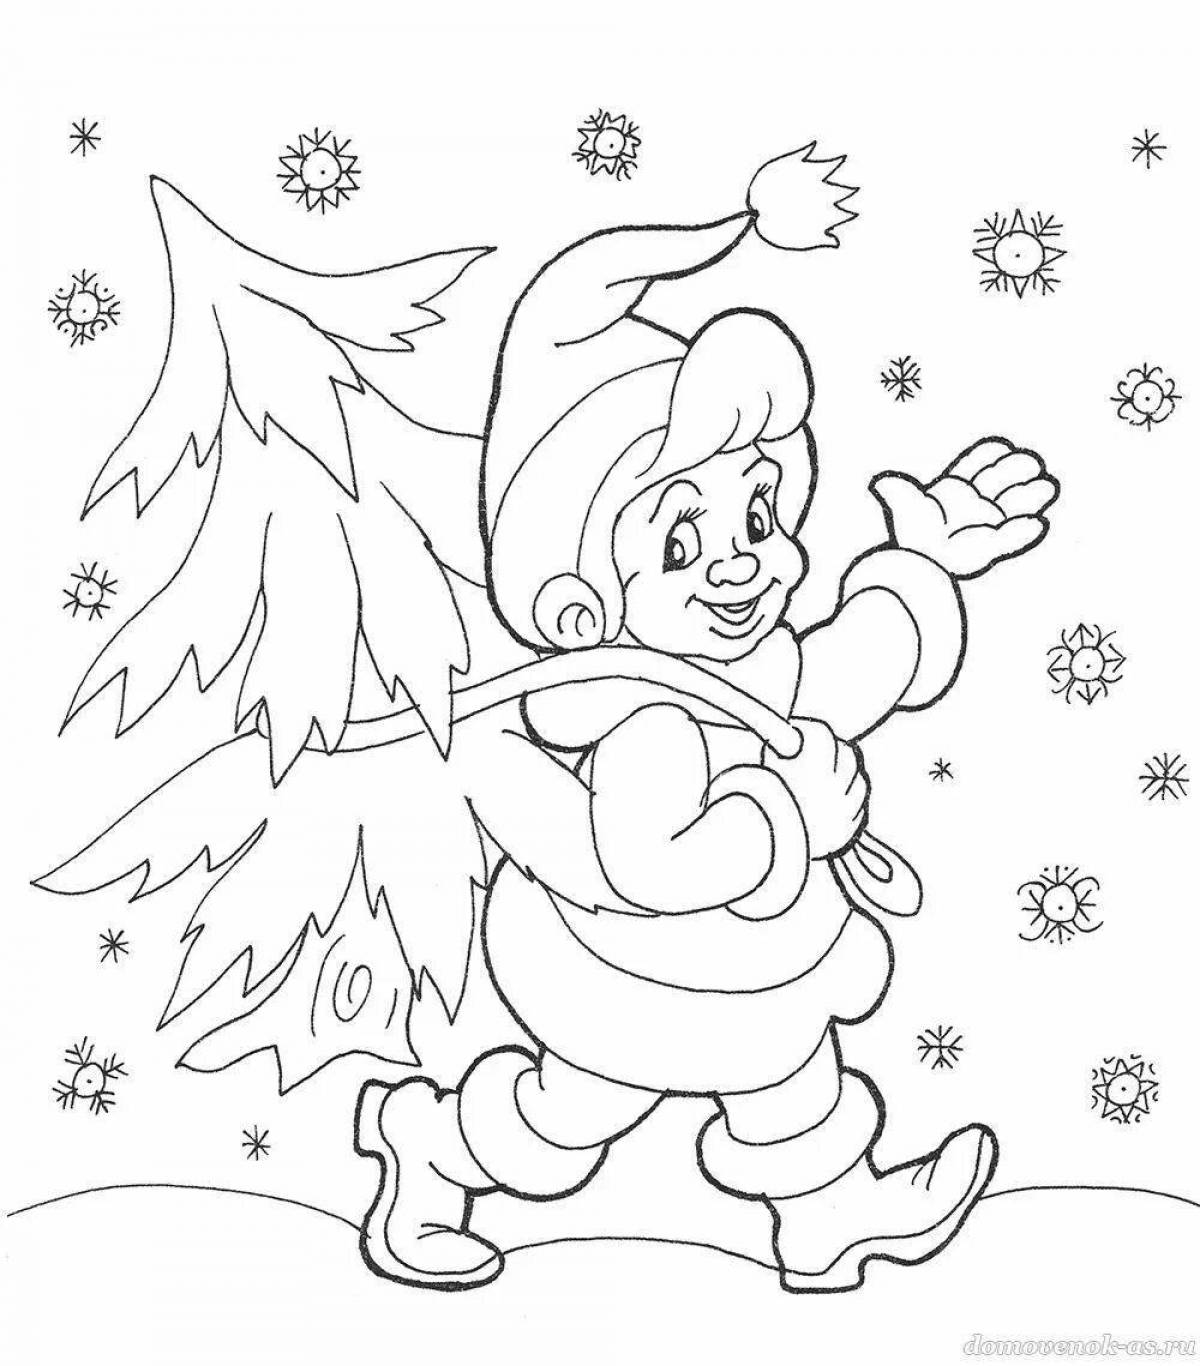 Christmas shining coloring book for 5 year olds